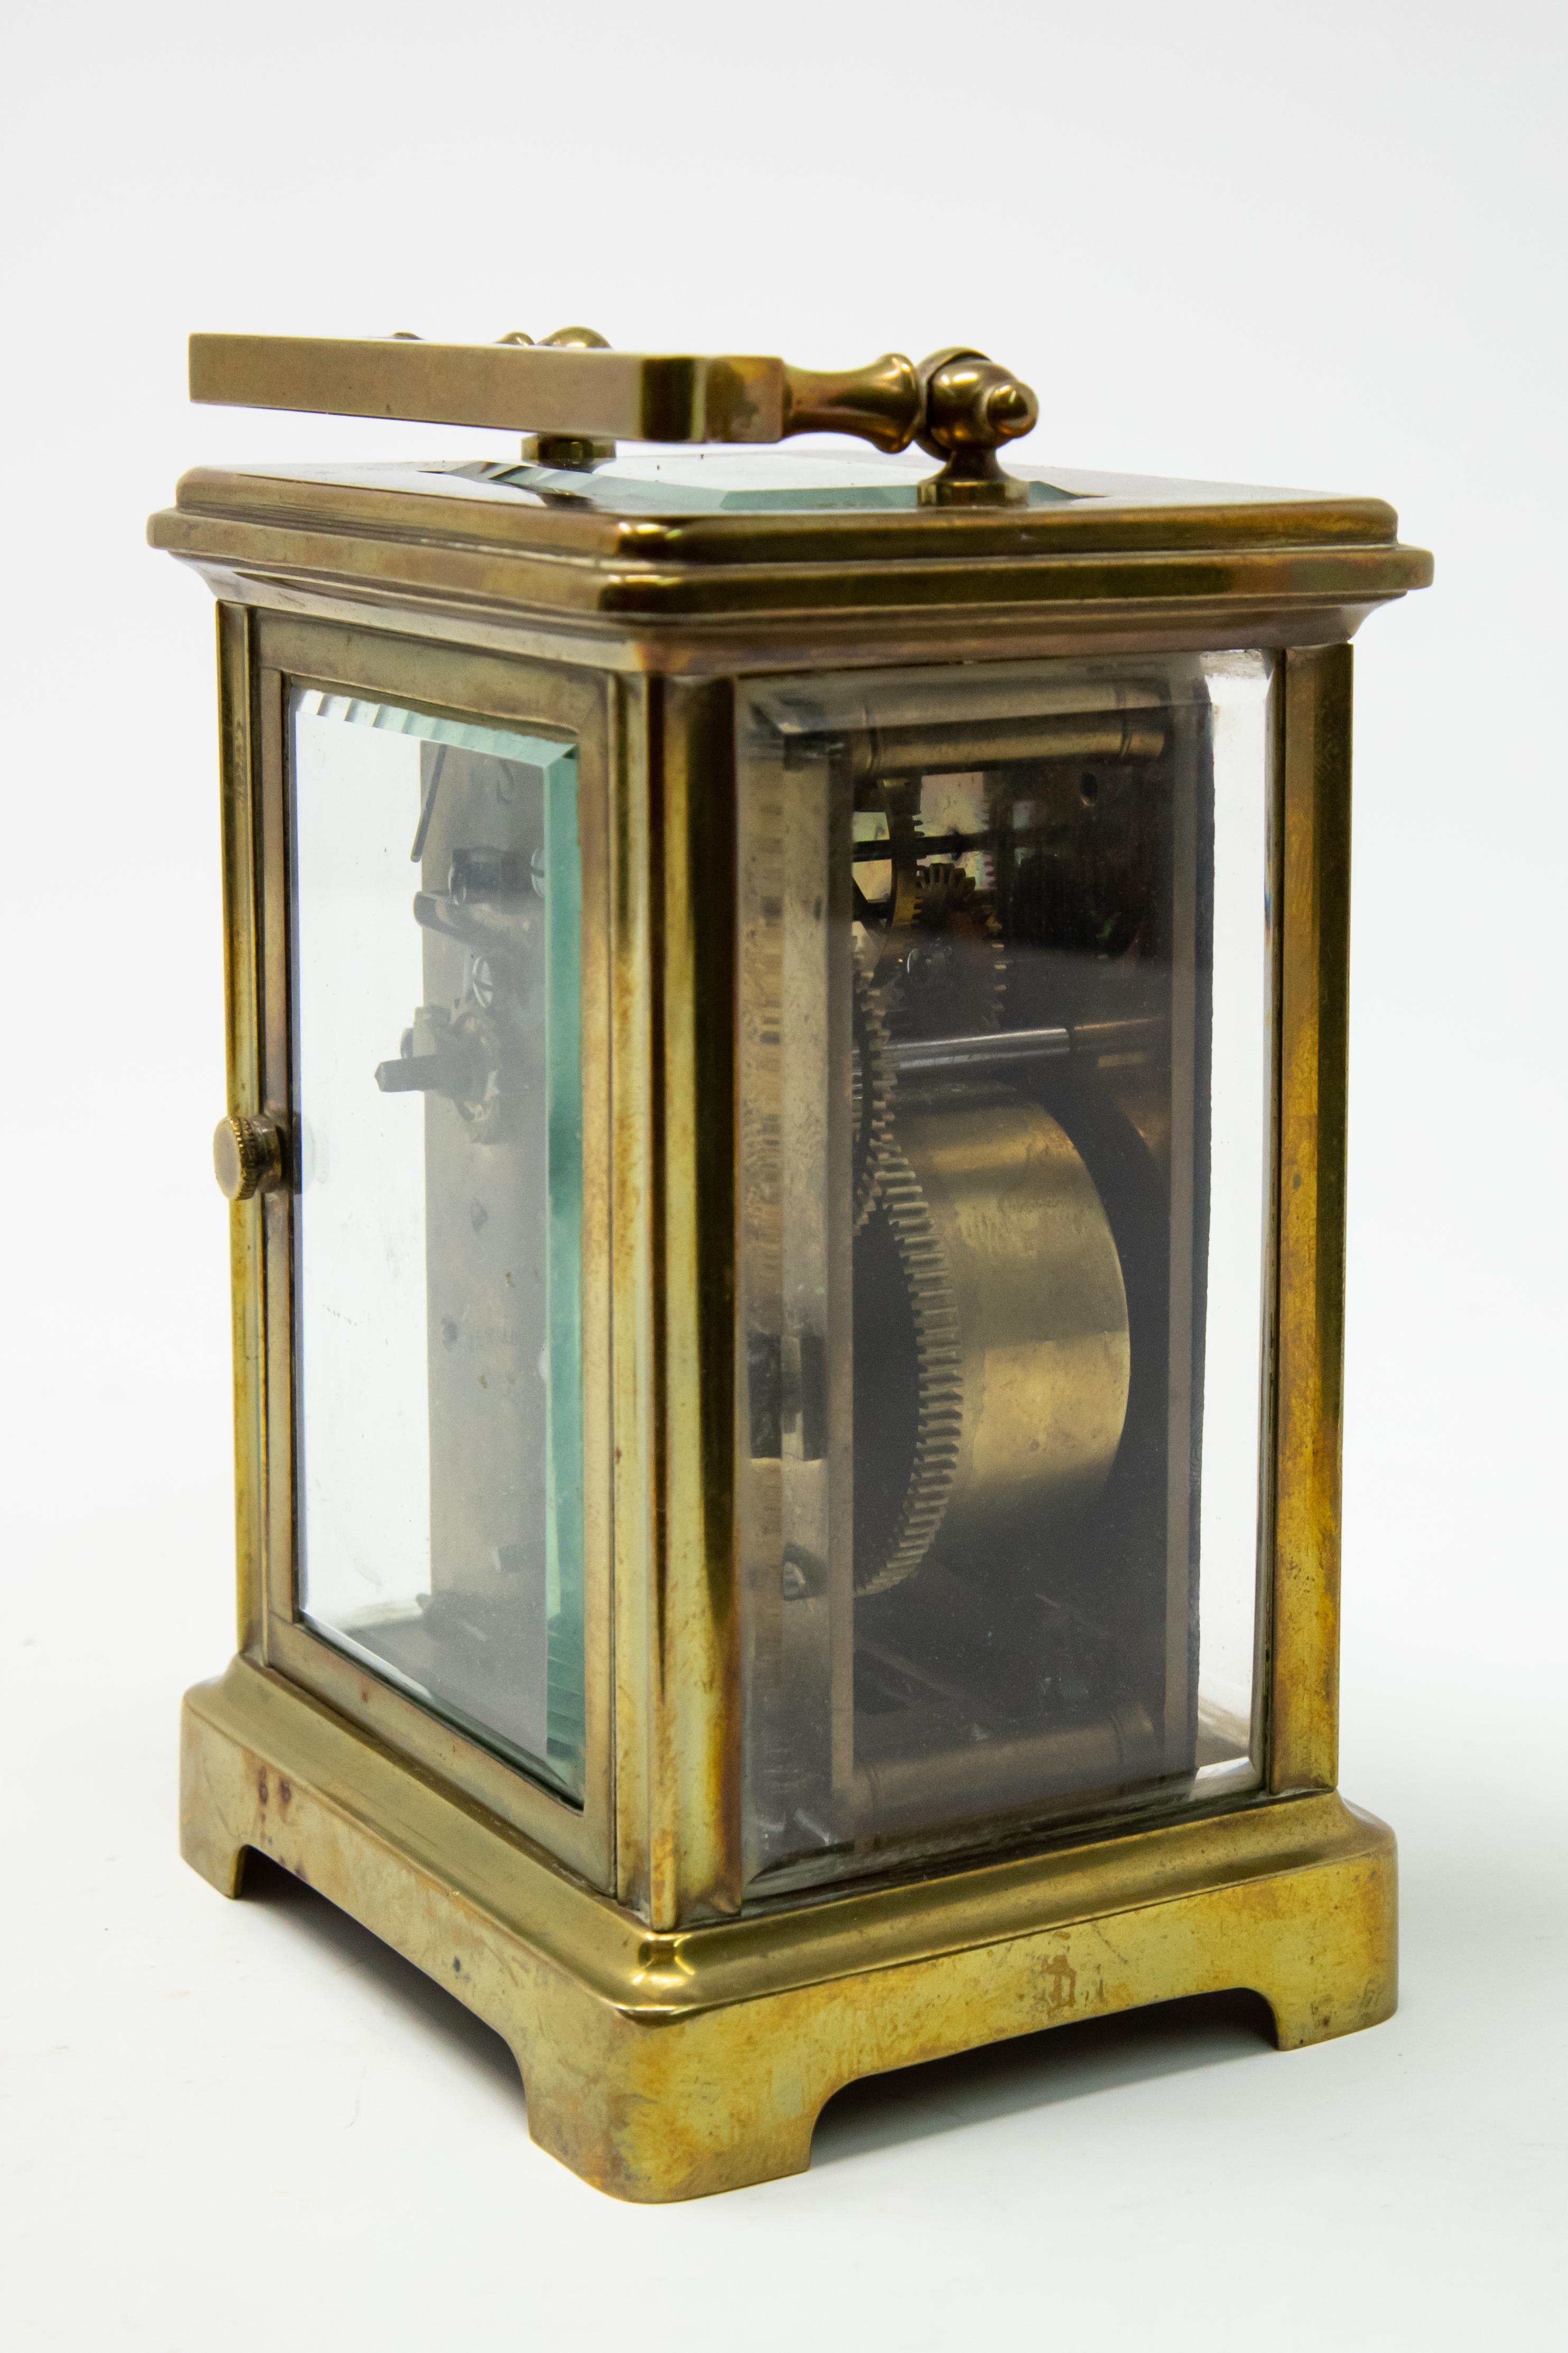 20th Century Brass Carriage Clock by J. E.Caldwell & Co. For Sale